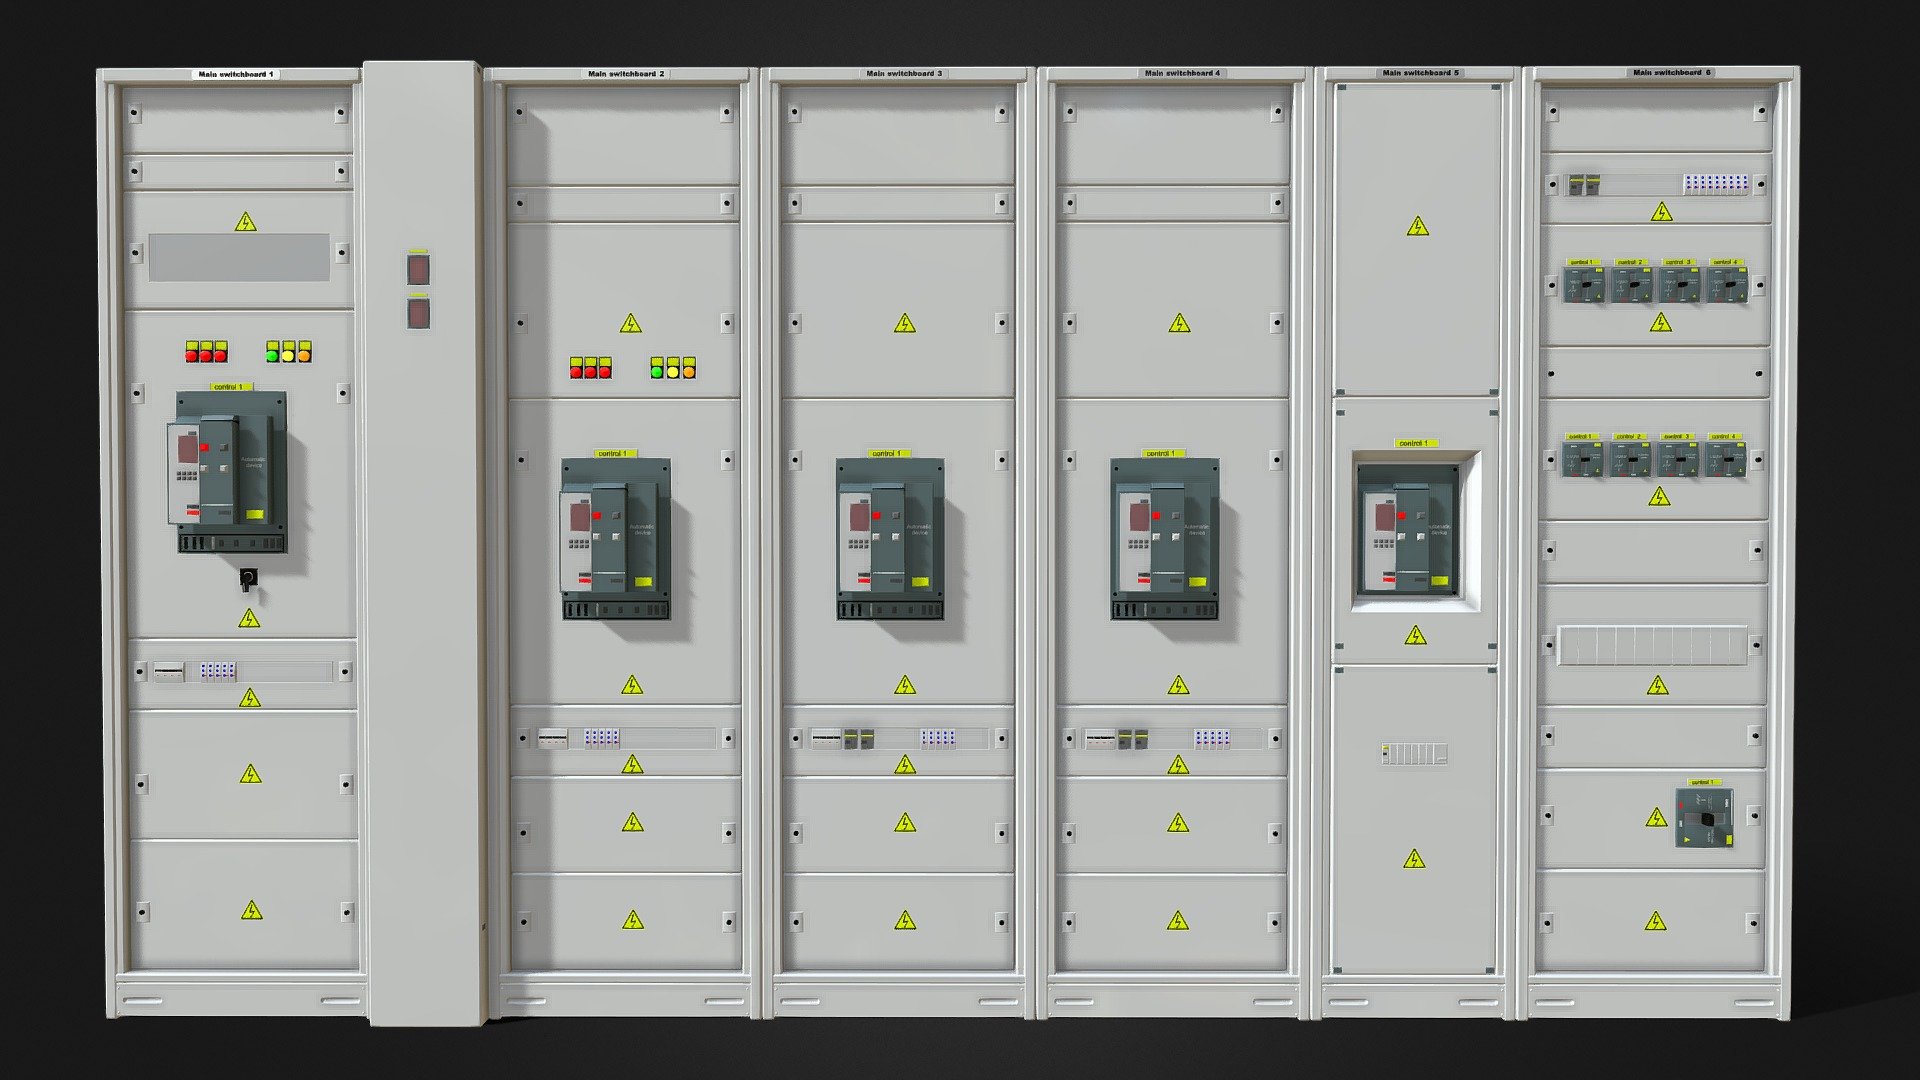 This Switching cabinets server automation.
The spectrum of electrical system and switch board construction ranges from small operating devices and control panels to simple switch cabinets and to entire rows of switch cabinets. Construction extends to PC switch cabinets and high-performance switch cabinets 3d model